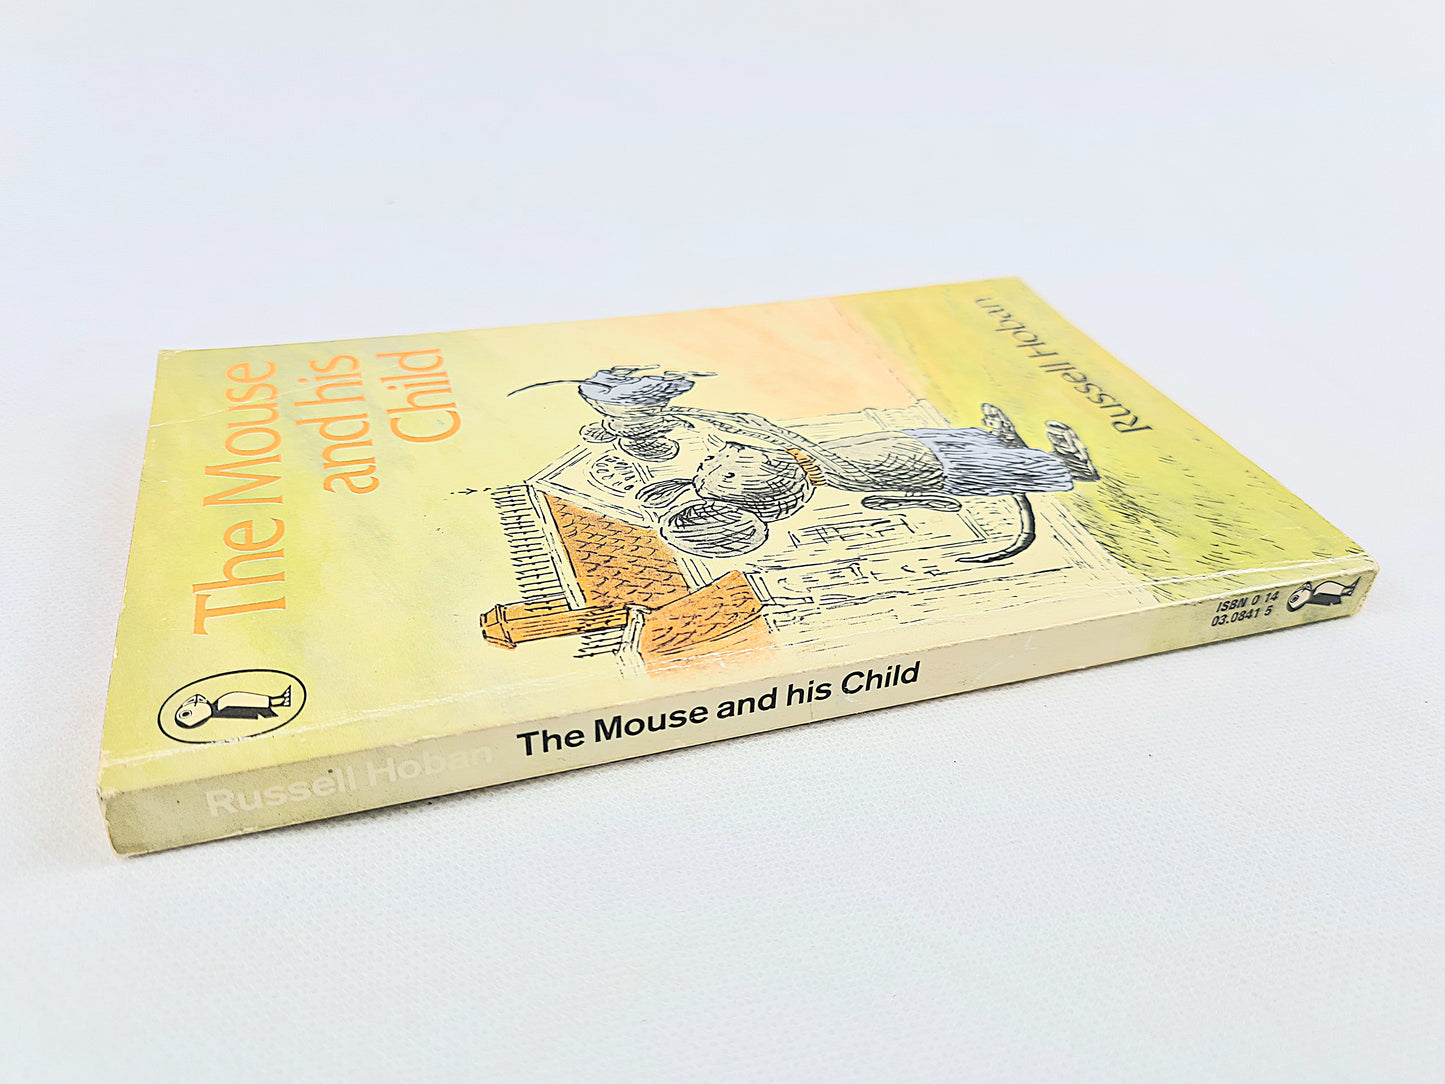 The Mouse and his Child by Russell Hoban. Old children's books. Puffin Books